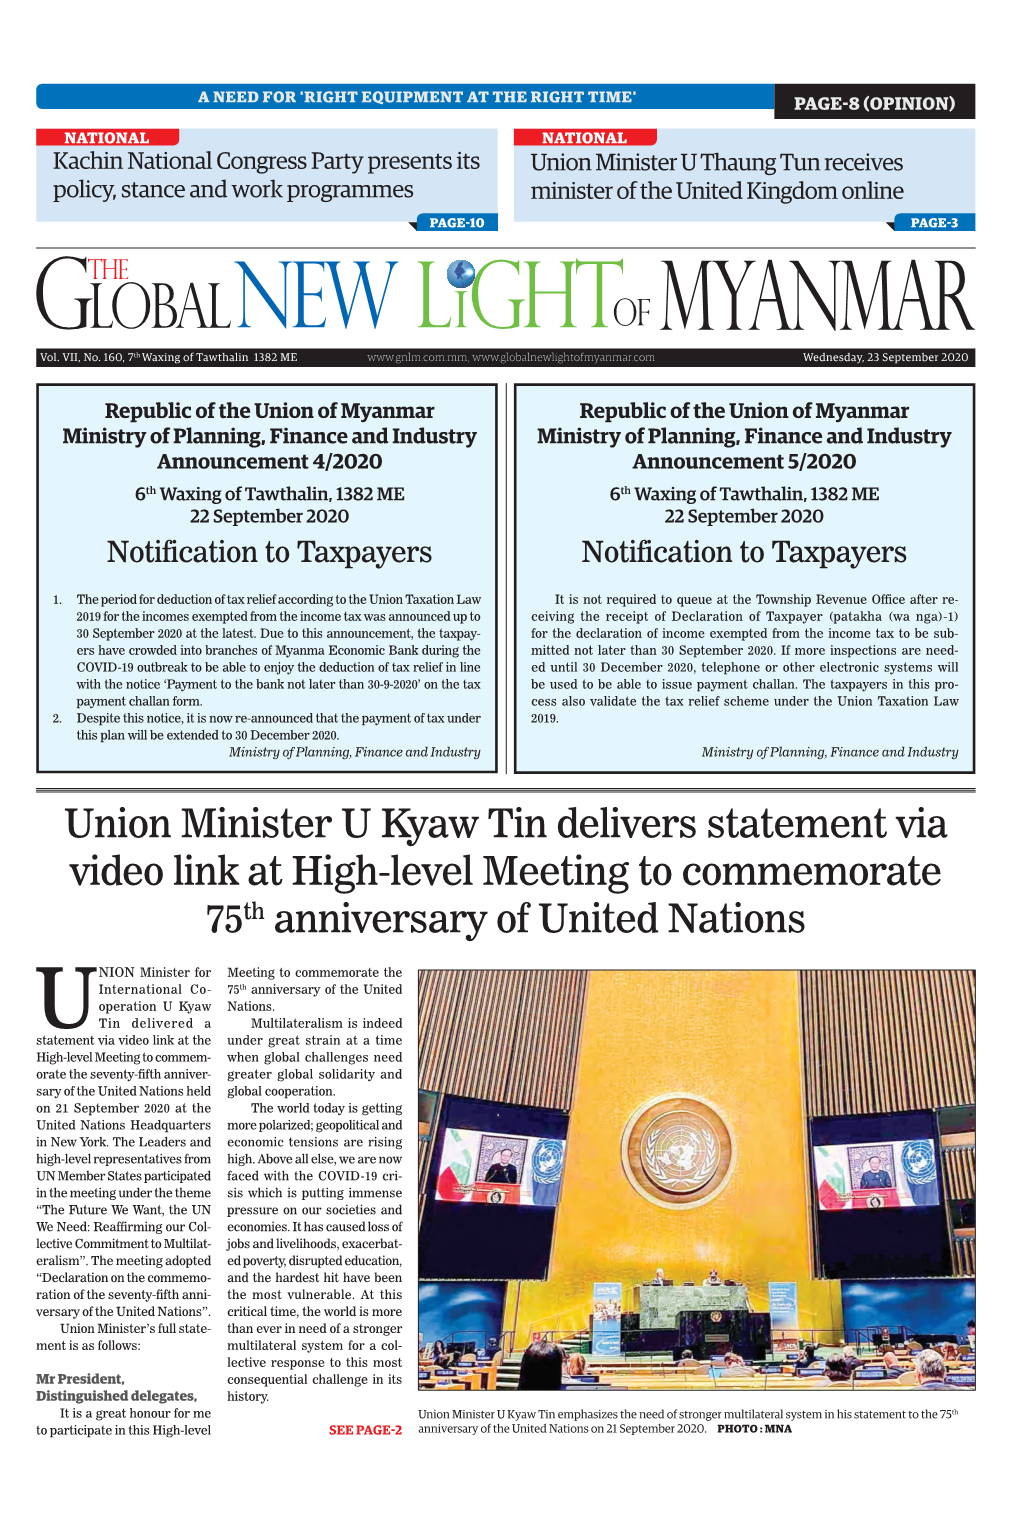 Union Minister U Kyaw Tin Delivers Statement Via Video Link at High-Level Meeting to Commemorate 75Th Anniversary of United Nations